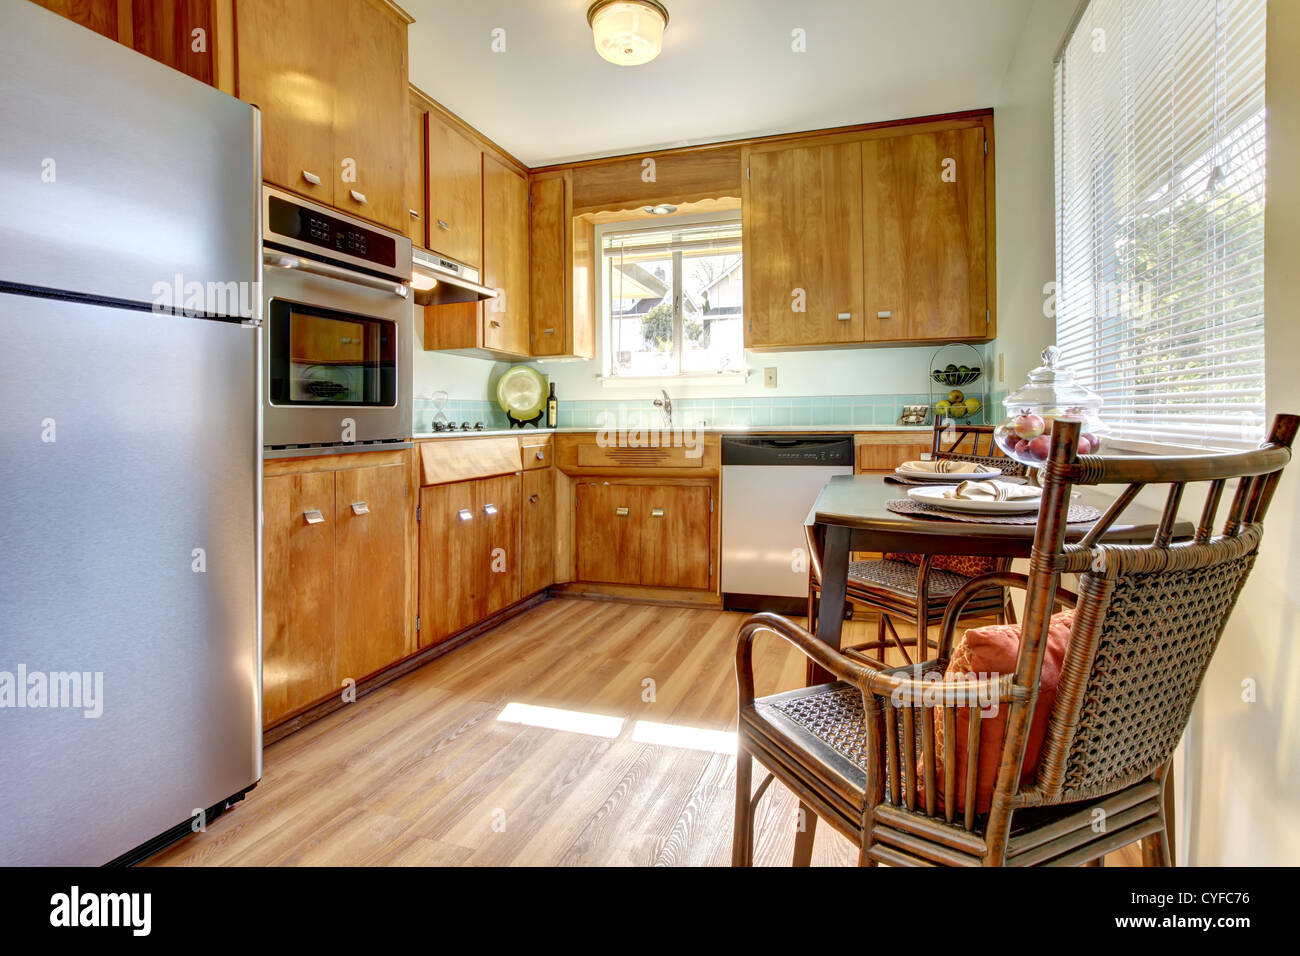 Cute old updated kitchen with blue tiles and new hardwood floor. Stock Photo